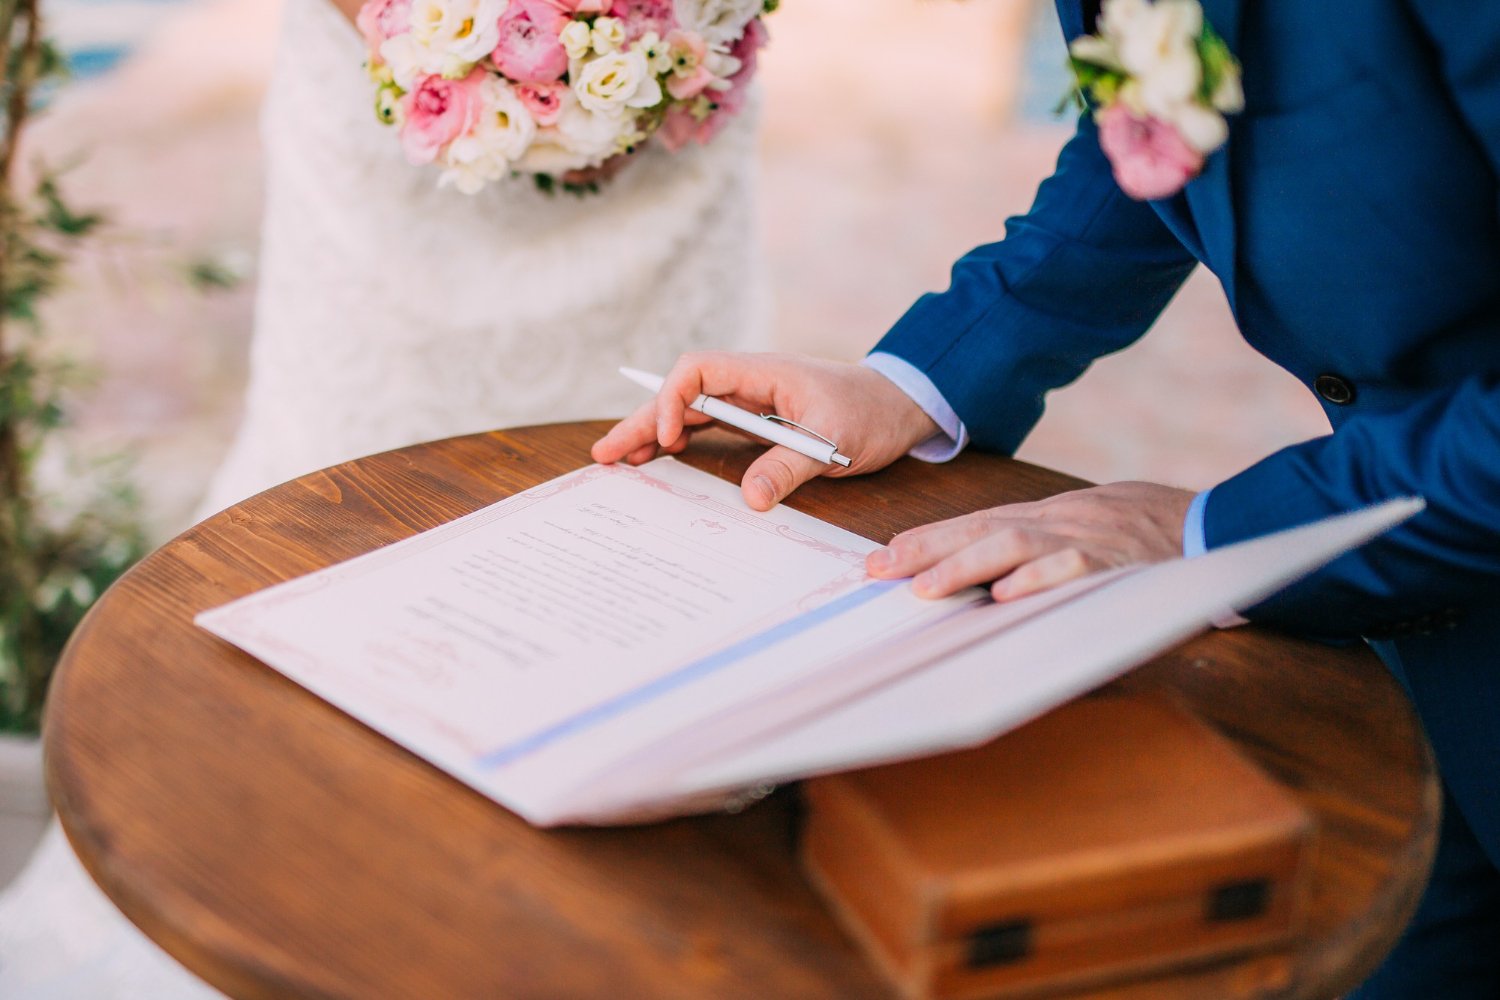 Newlyweds put their signatures in the act of registering a marriage